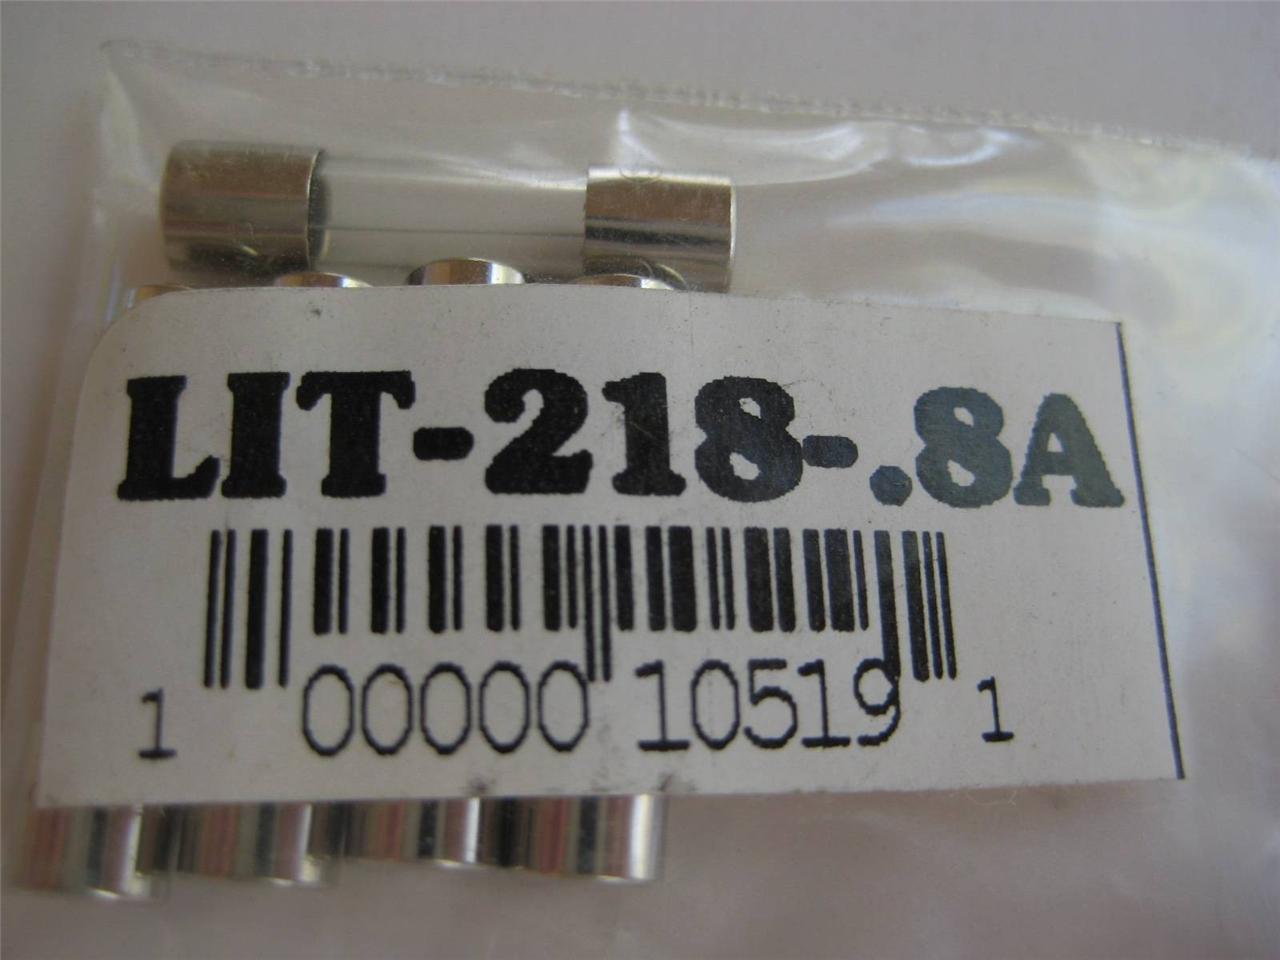 Littelfuse Fuse 218 .630 8/10 1-1/4 1-6/10 2 2-1/2 3.15 4 or 8 A 5x20mm 